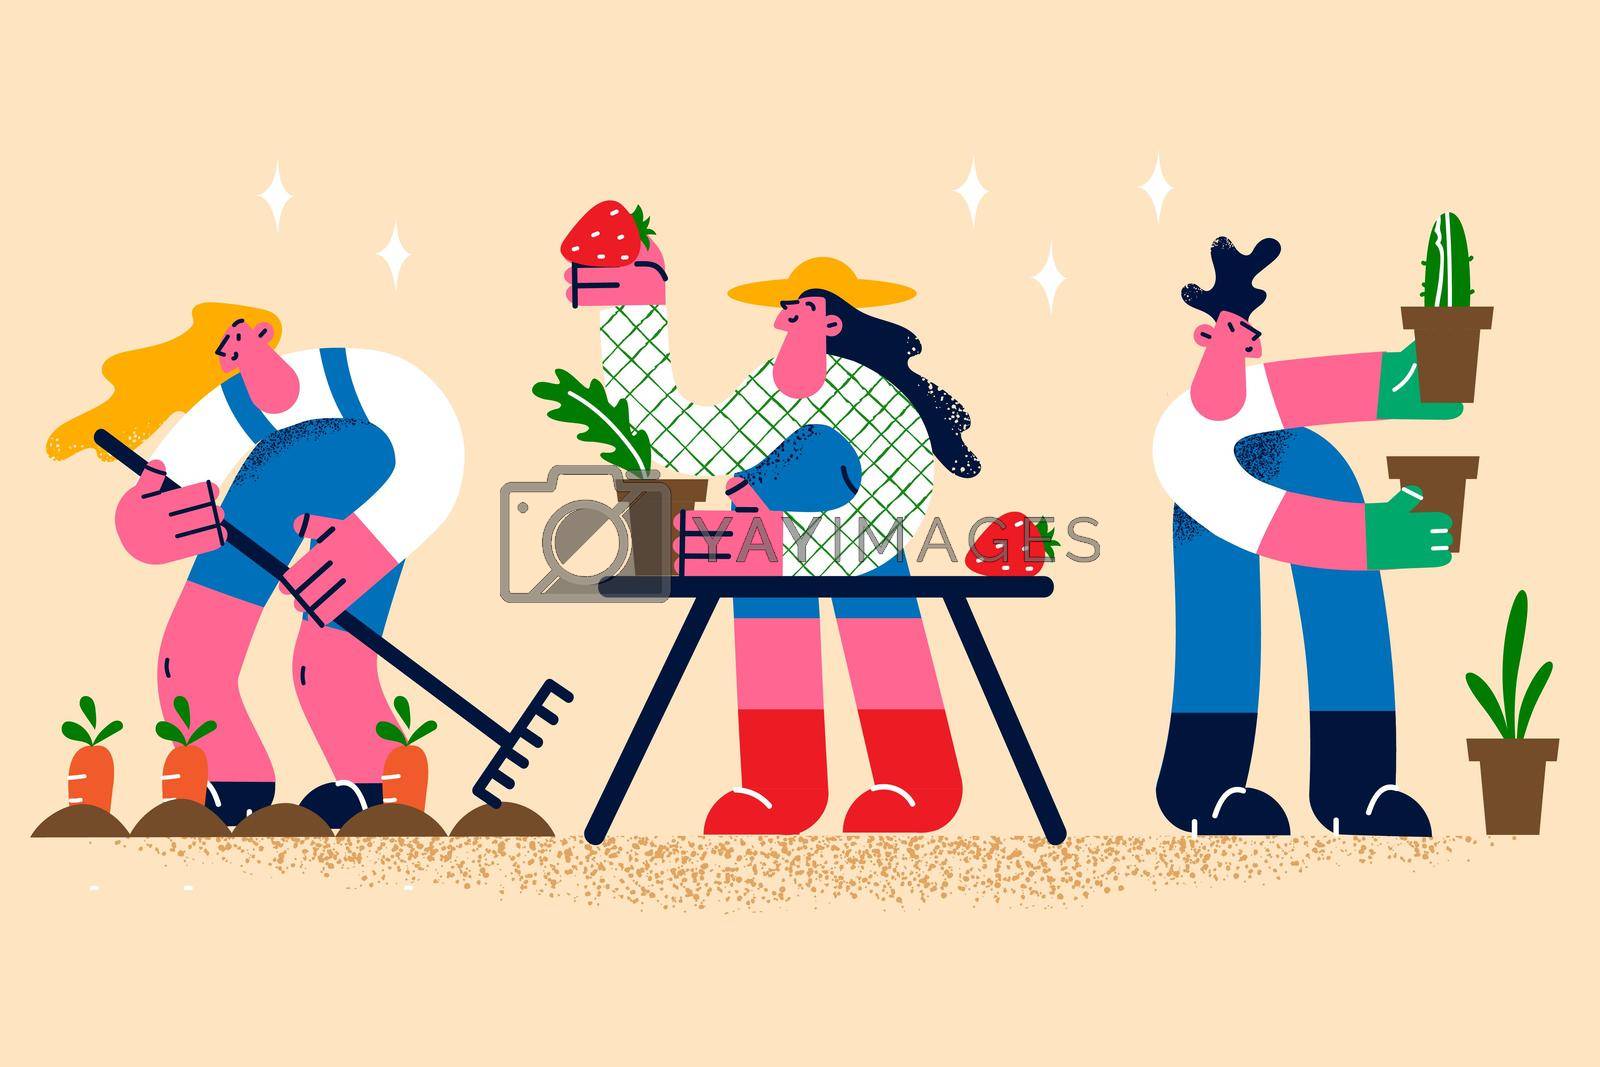 Agriculture and farming lifestyle concept. Group of young women and man farmers standing with grown plants fruits and vegetables produce vector illustration